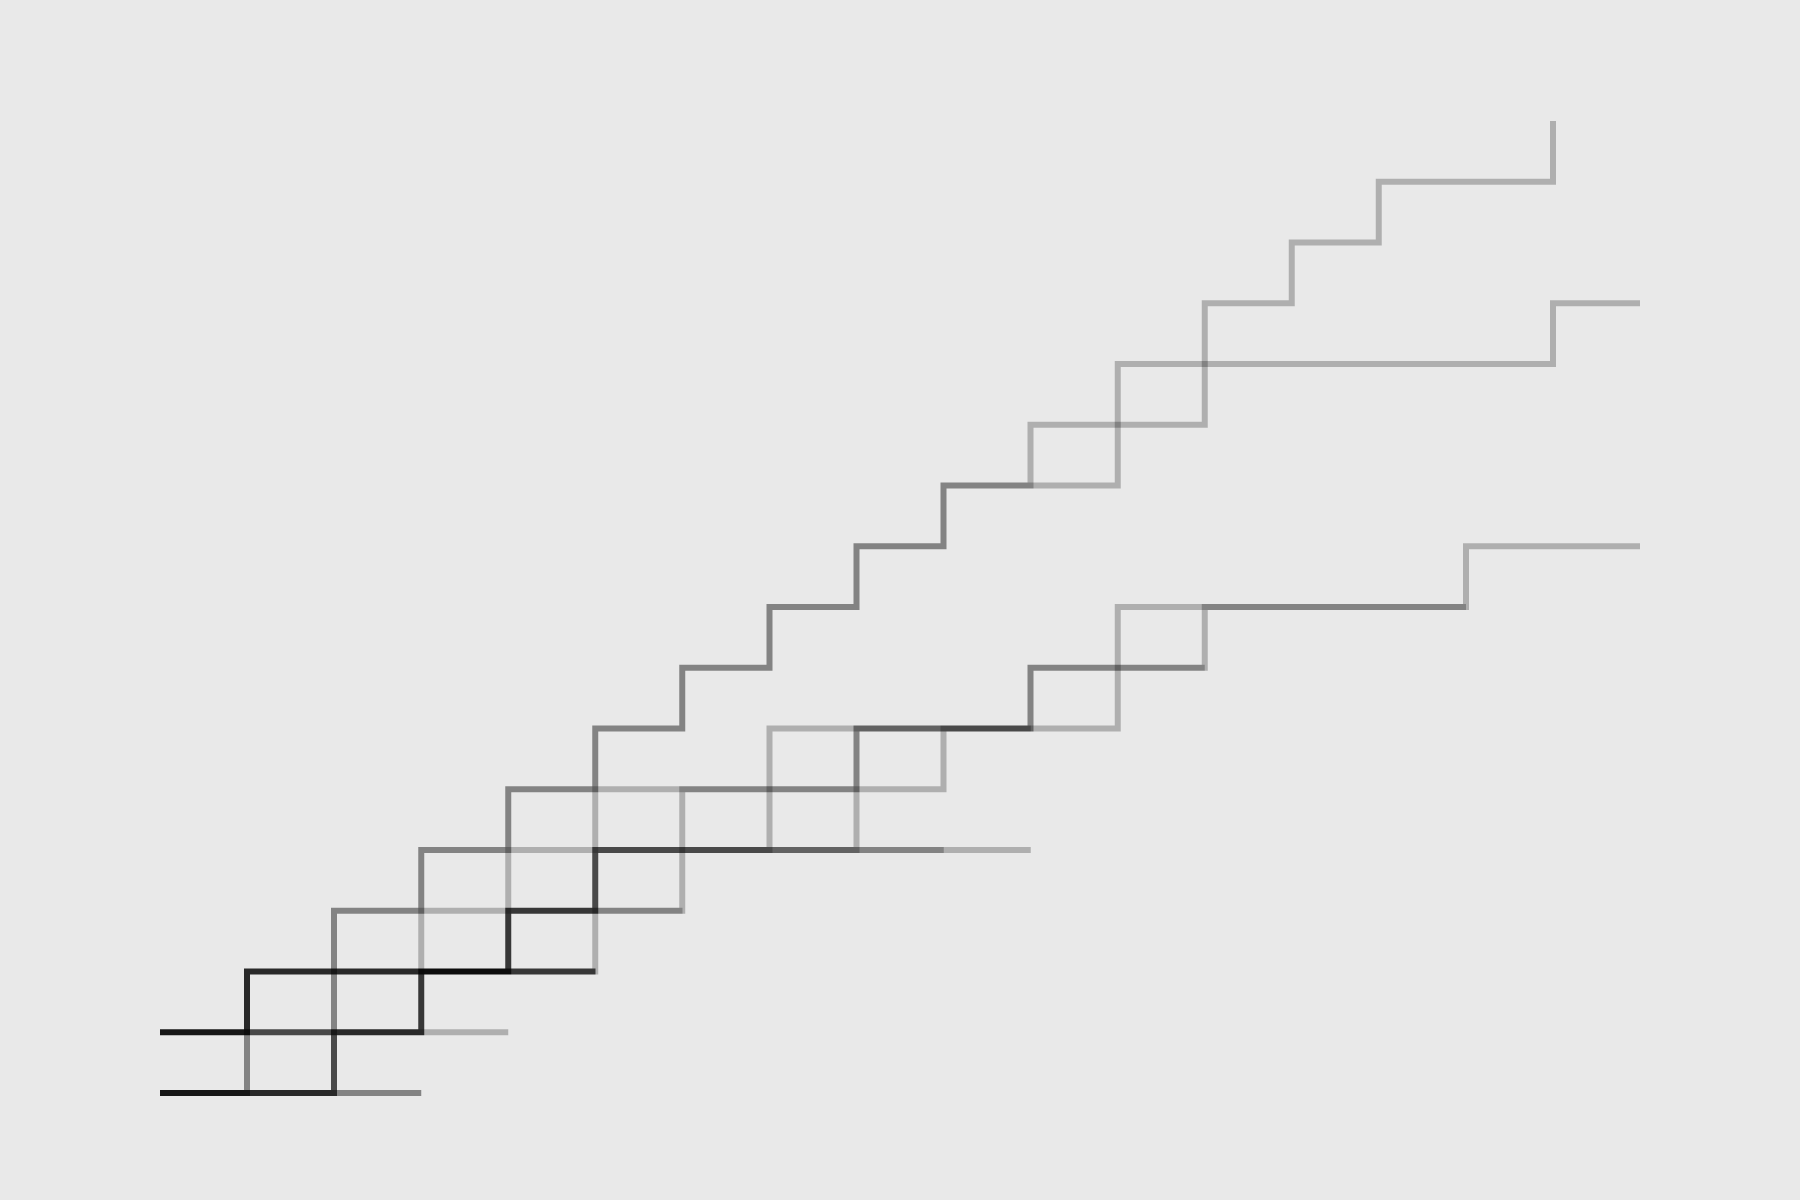 How to Make a Multi-line Step Chart in R | FlowingData